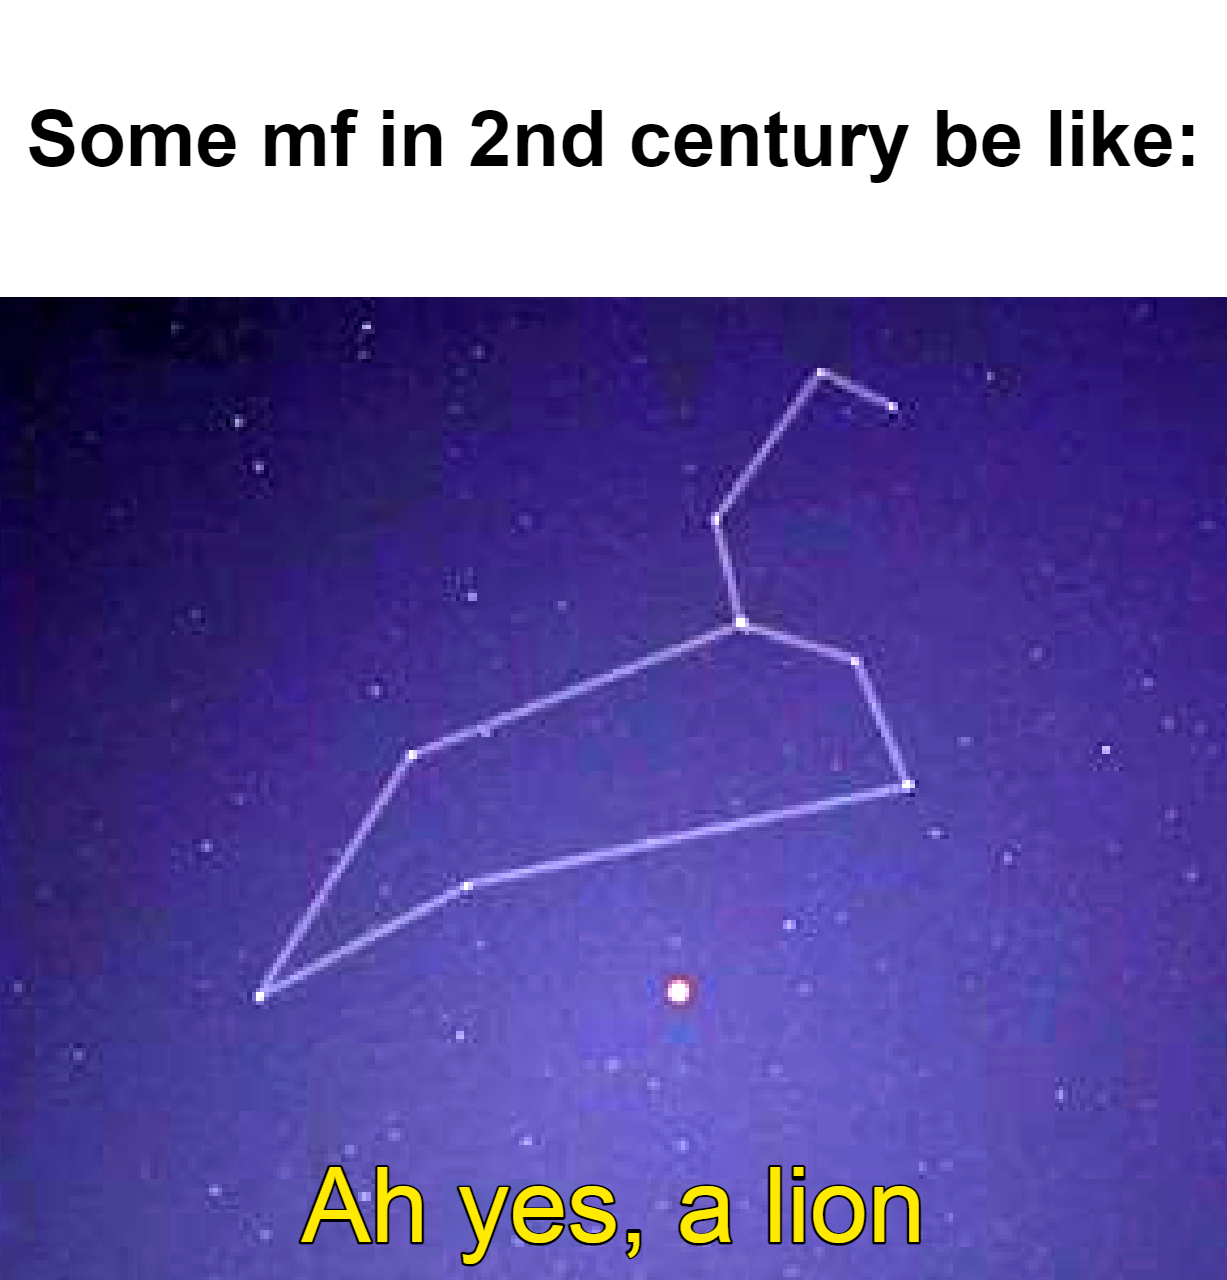 atmosphere - Some mf in 2nd century be Ah yes, a lion